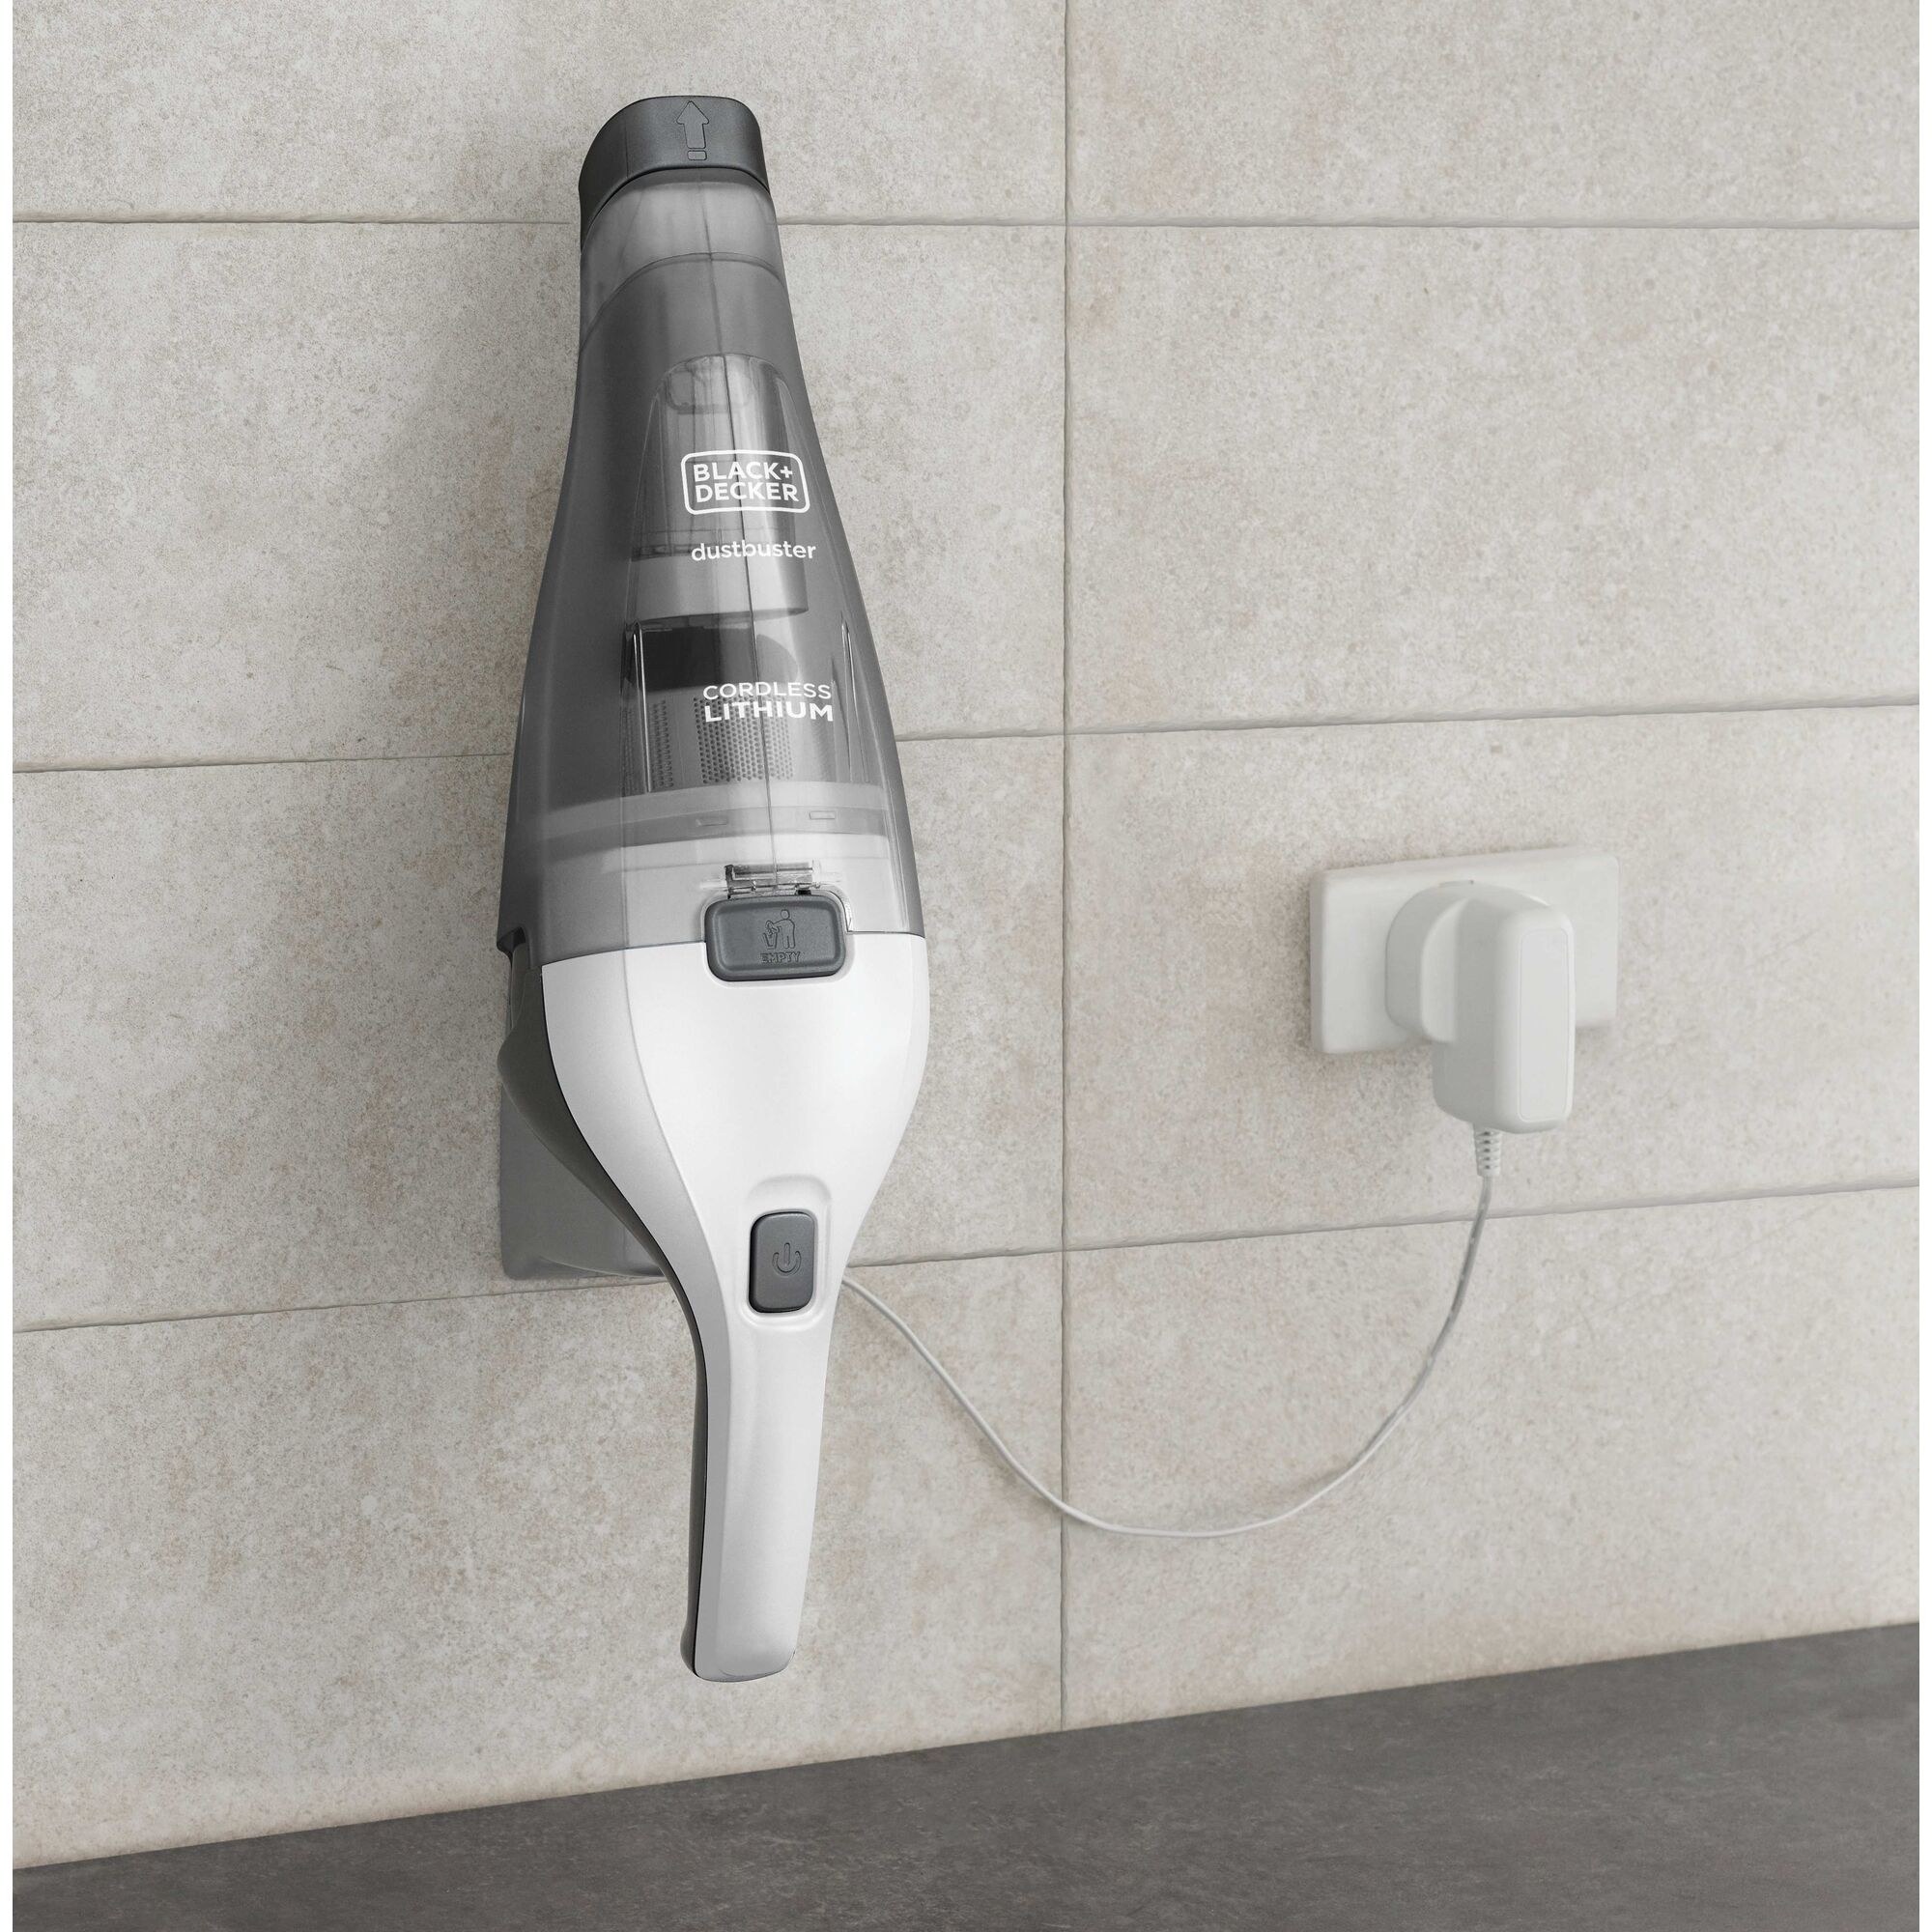 Charging cord and wall attachable feature of a dustbuster quickclean cordless hand vacuum.